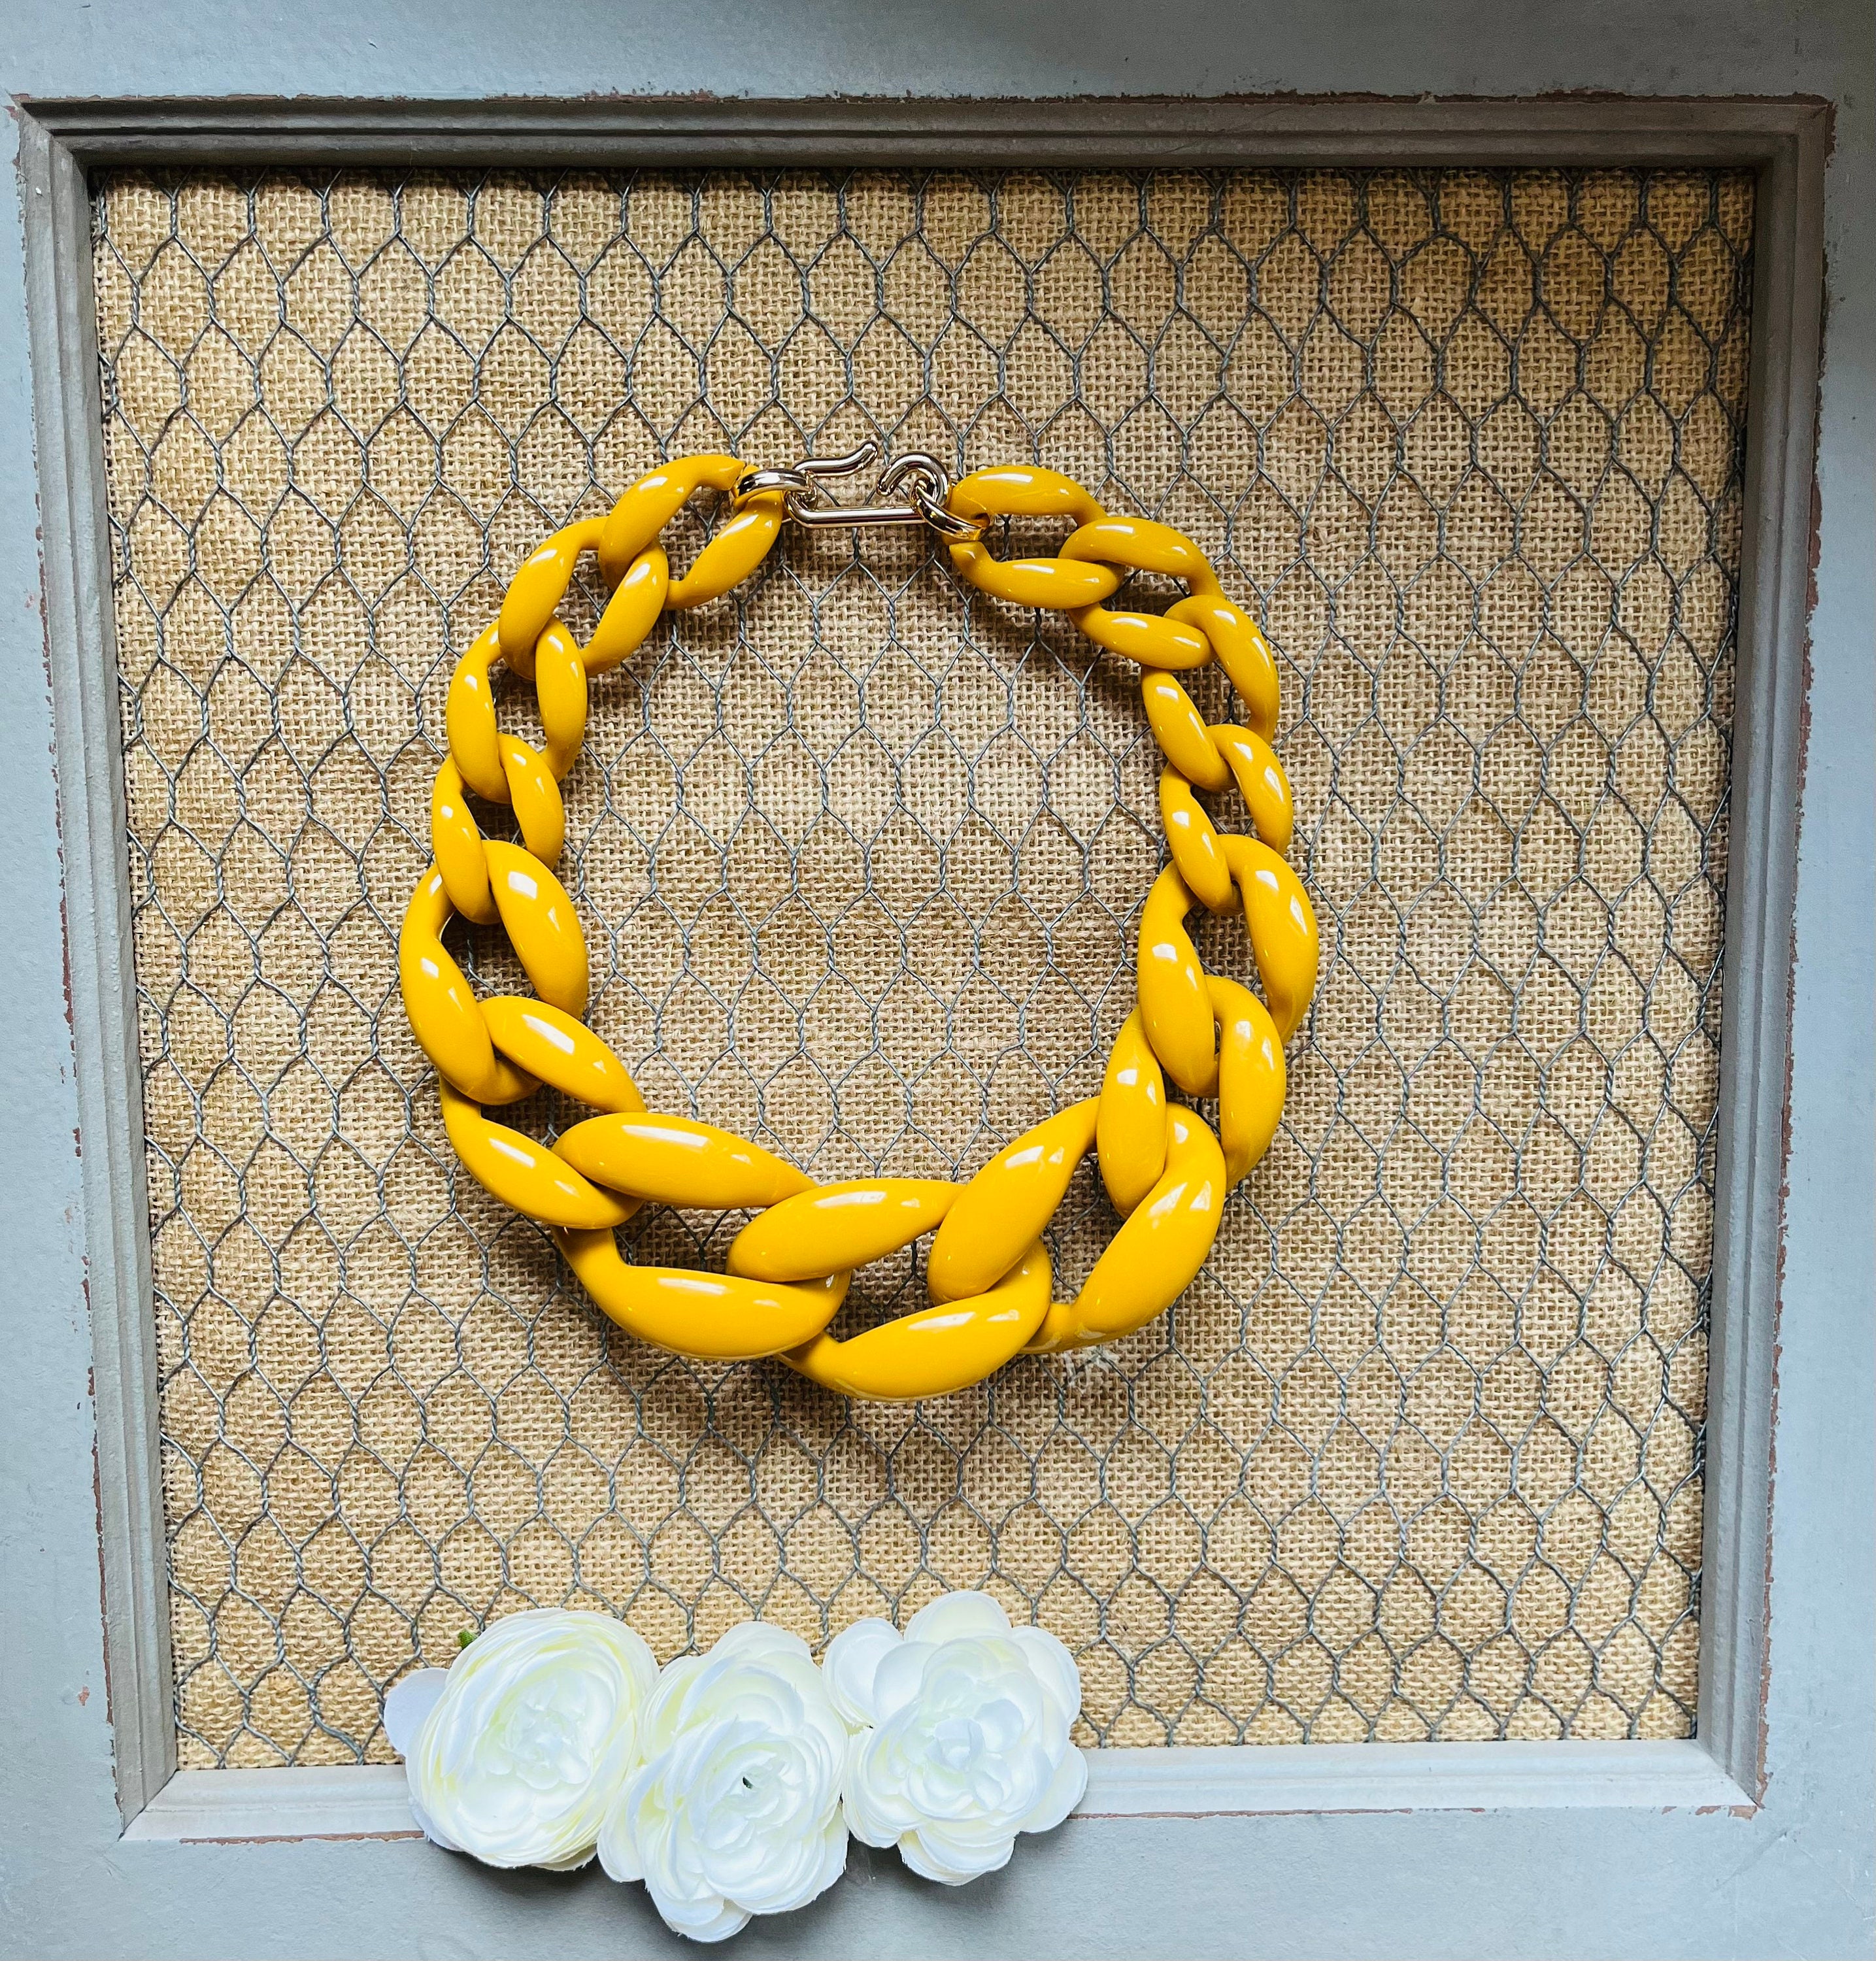 Buy wholesale 'Jazzy' Asymmetrical U Shape Silicone Necklace - Gritty  White, Sunny Yellow, Mustard and Golden Sun